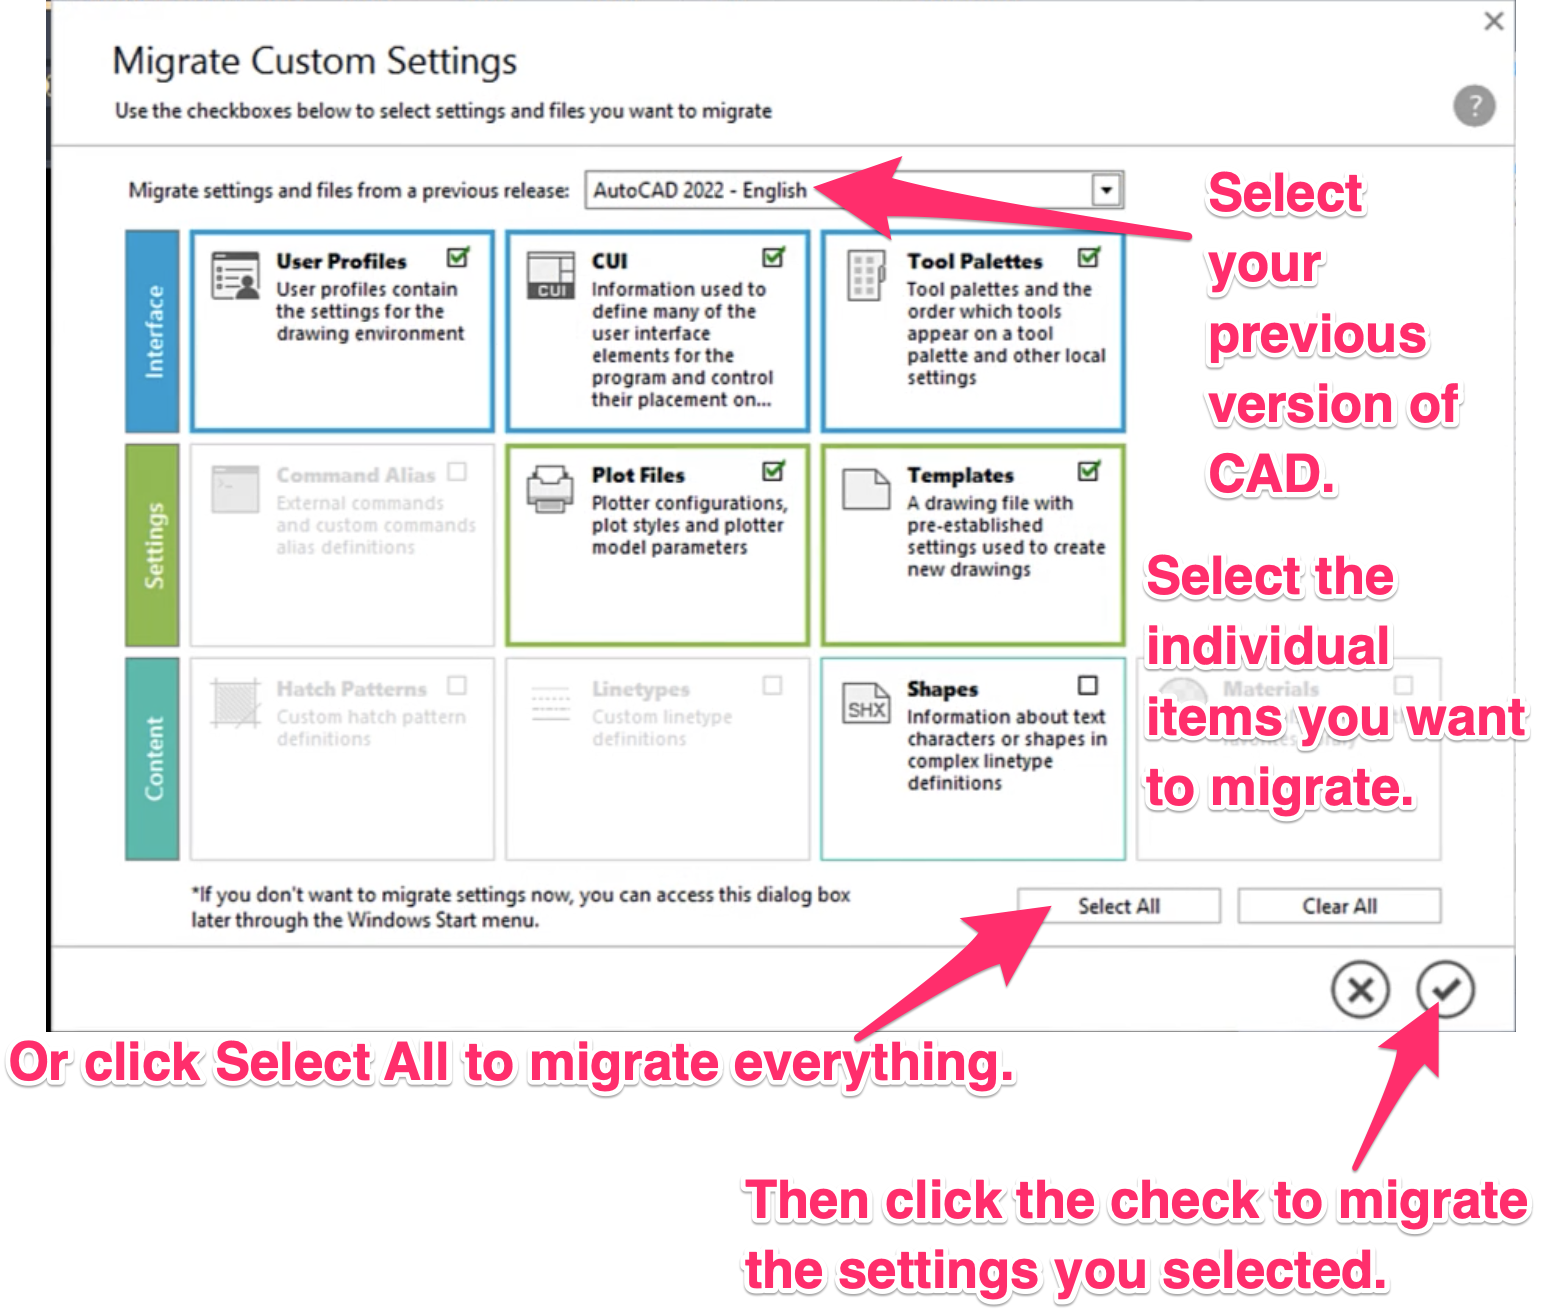 Migrate Custom Settings dialog box, overview